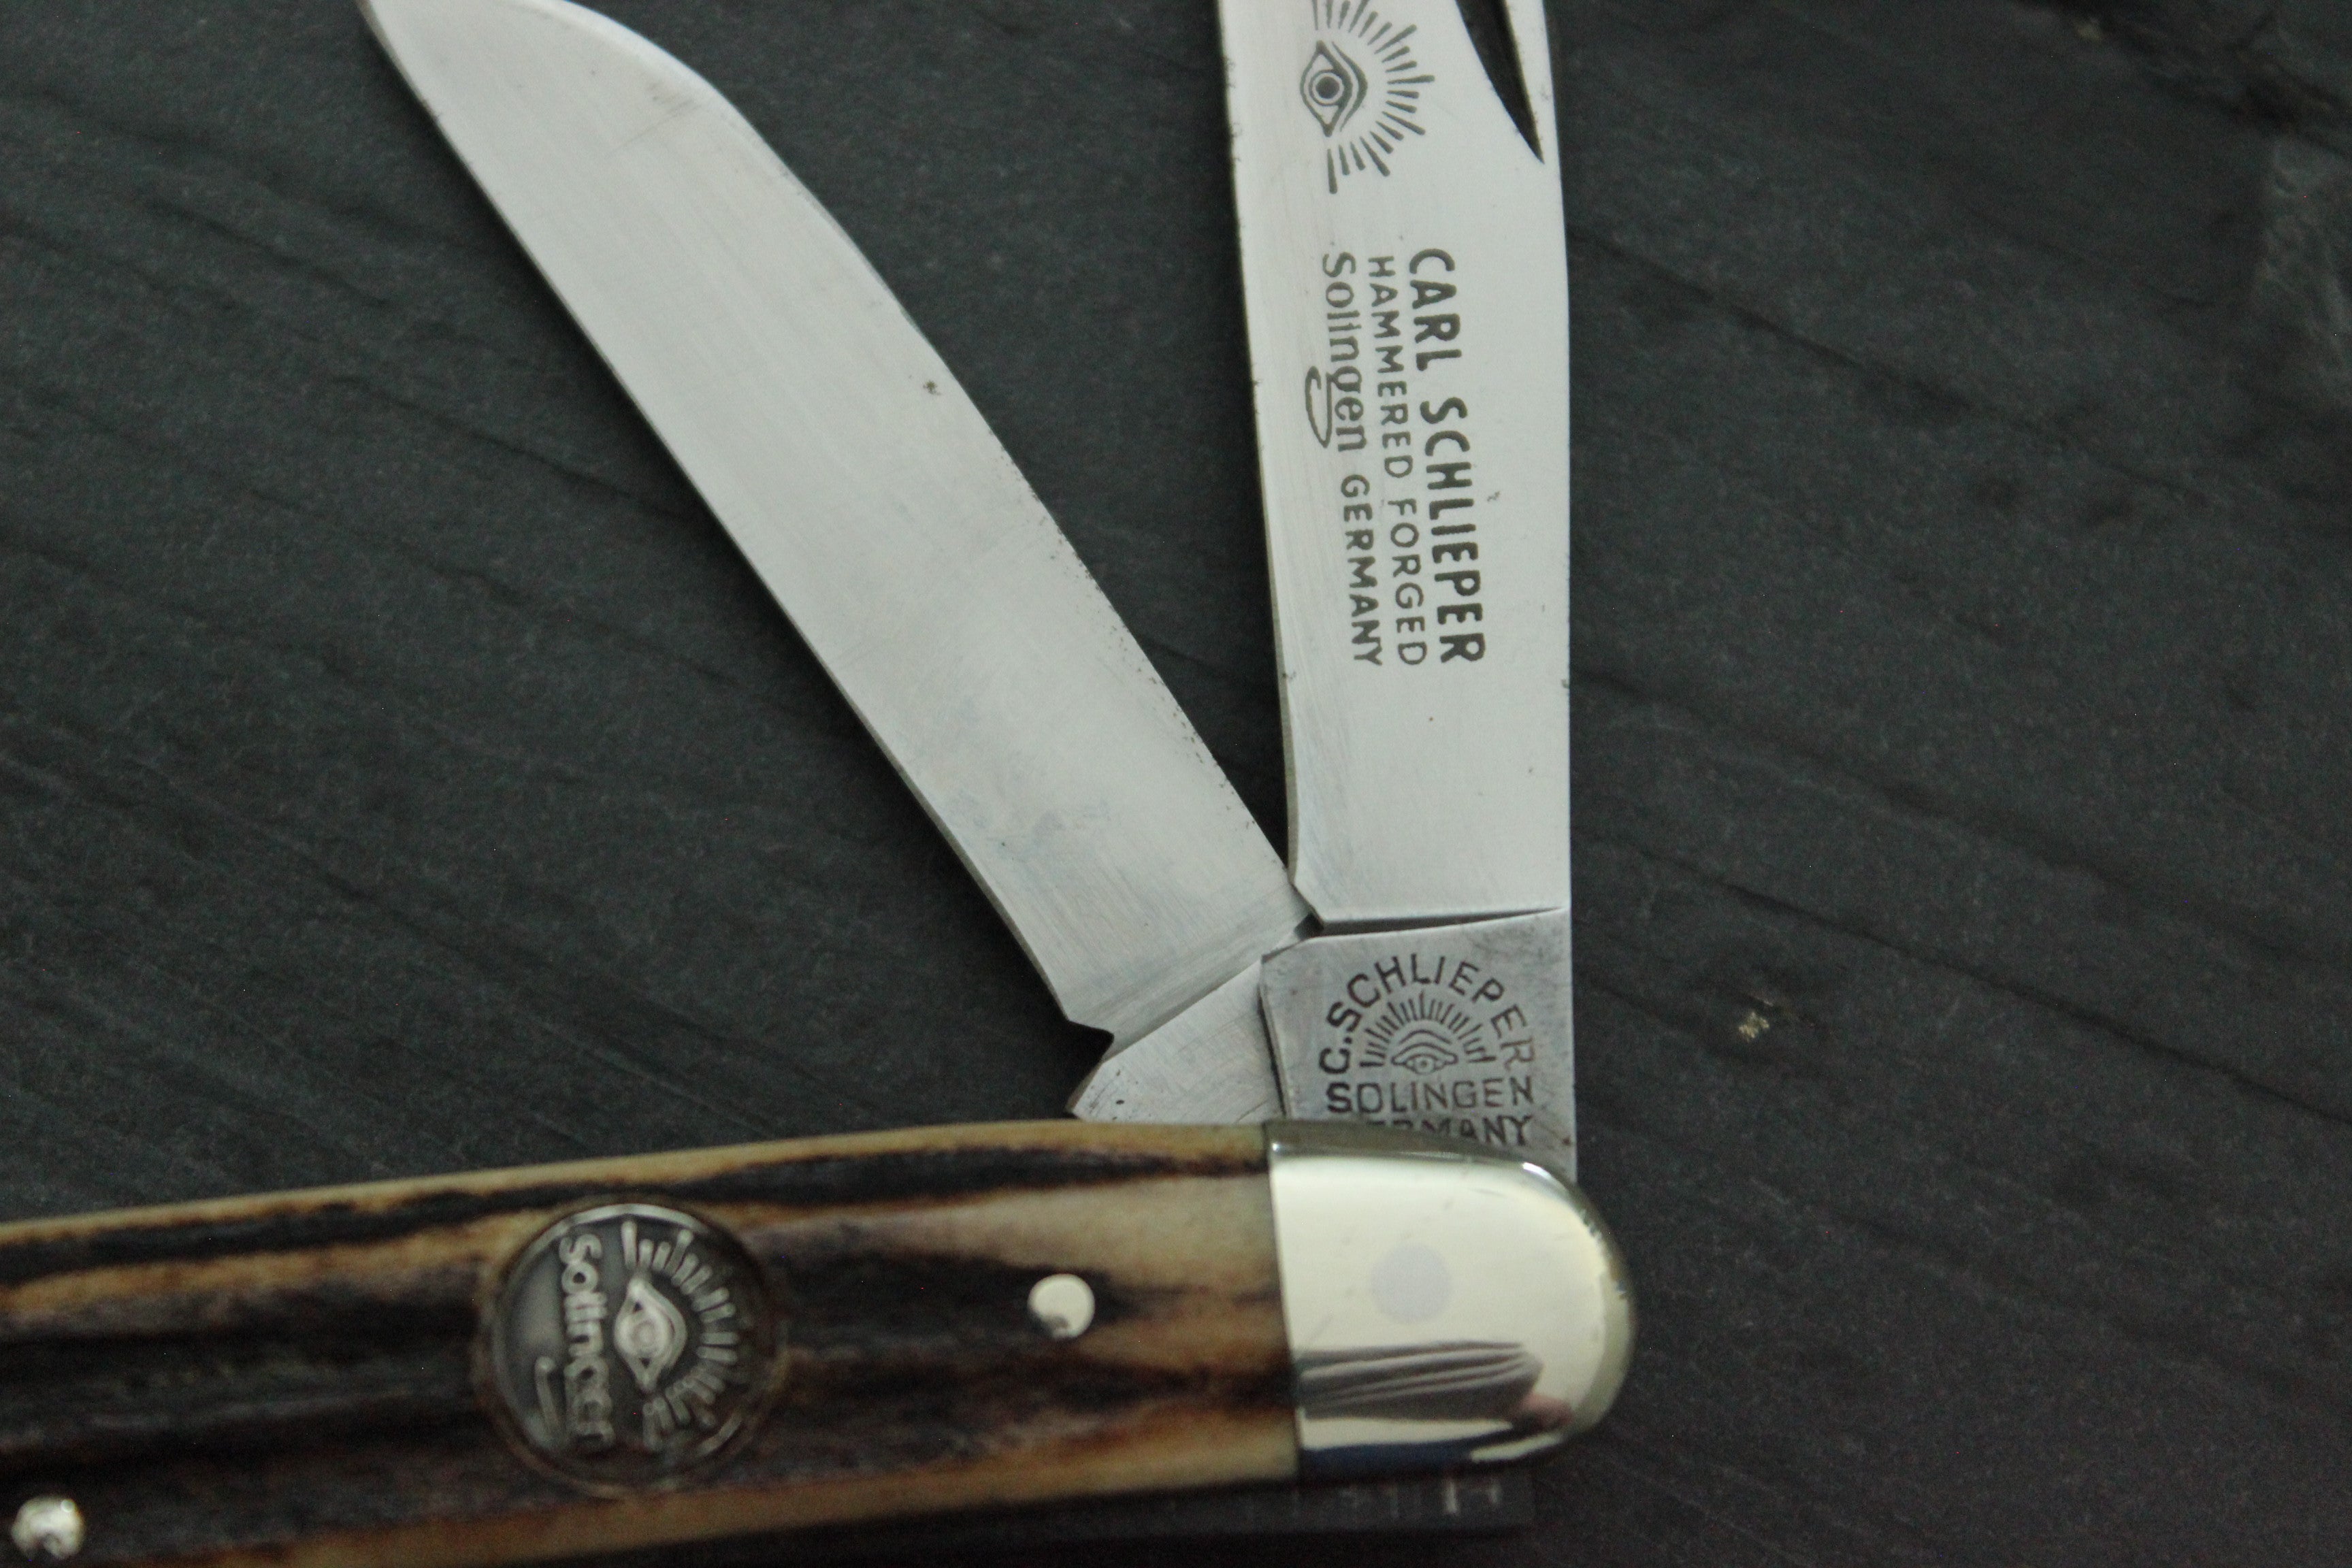 I need info on this German Eye Brand knife. When did they make this? : r/ knives